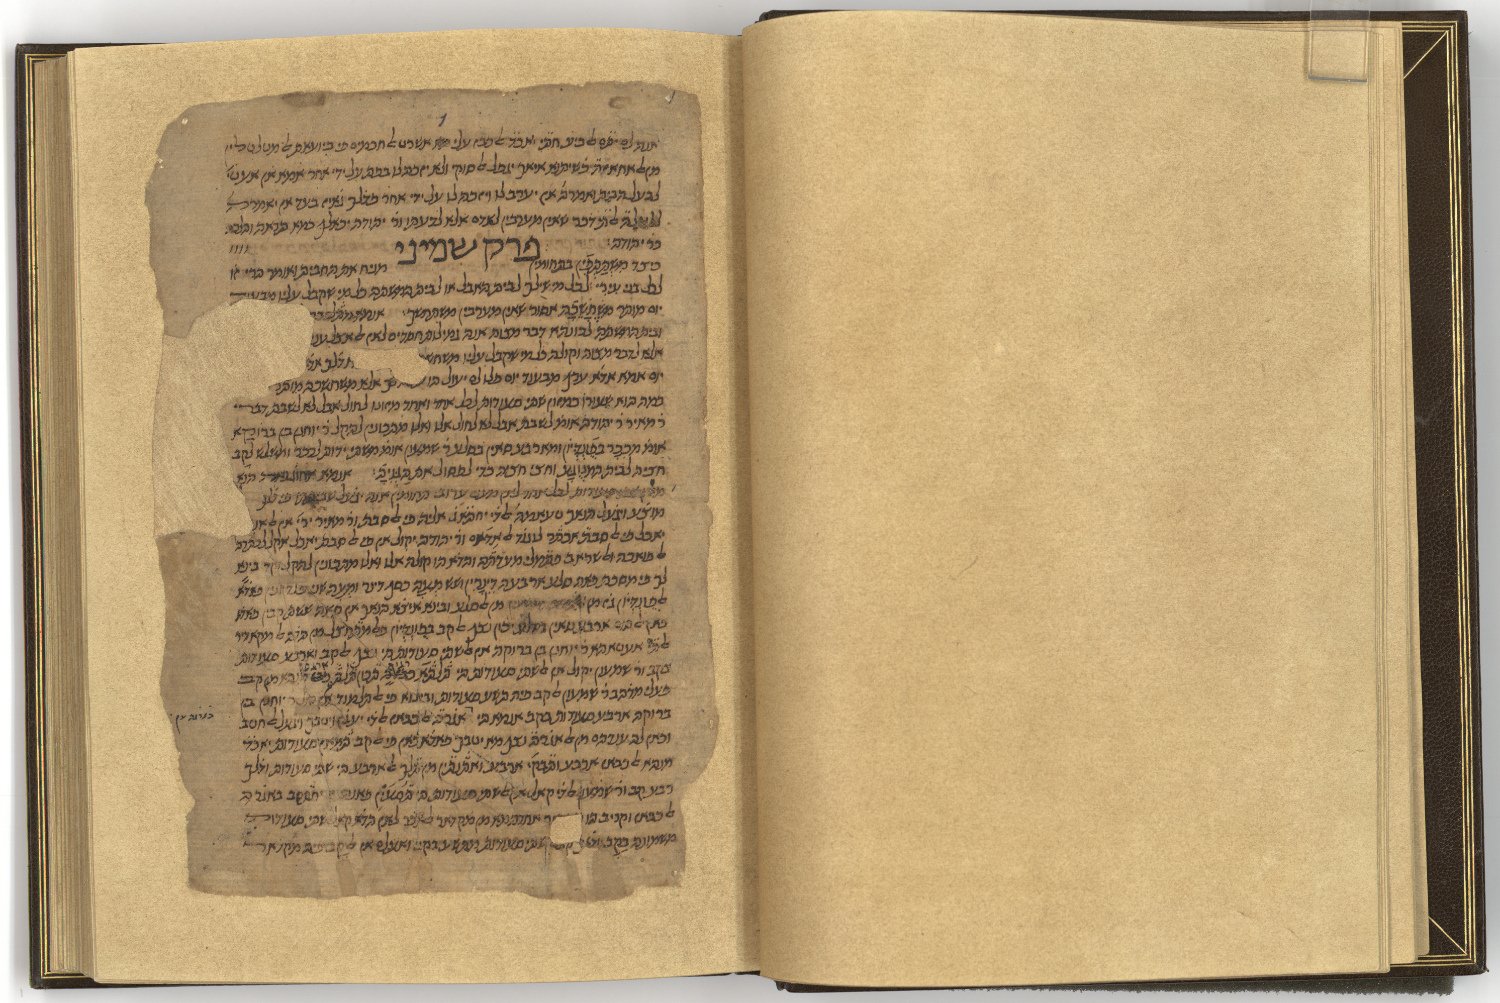  Maimonides' handwritten commentary on the Mishnah (the Moed and Nashim sections) kept at the National Library of Israel 